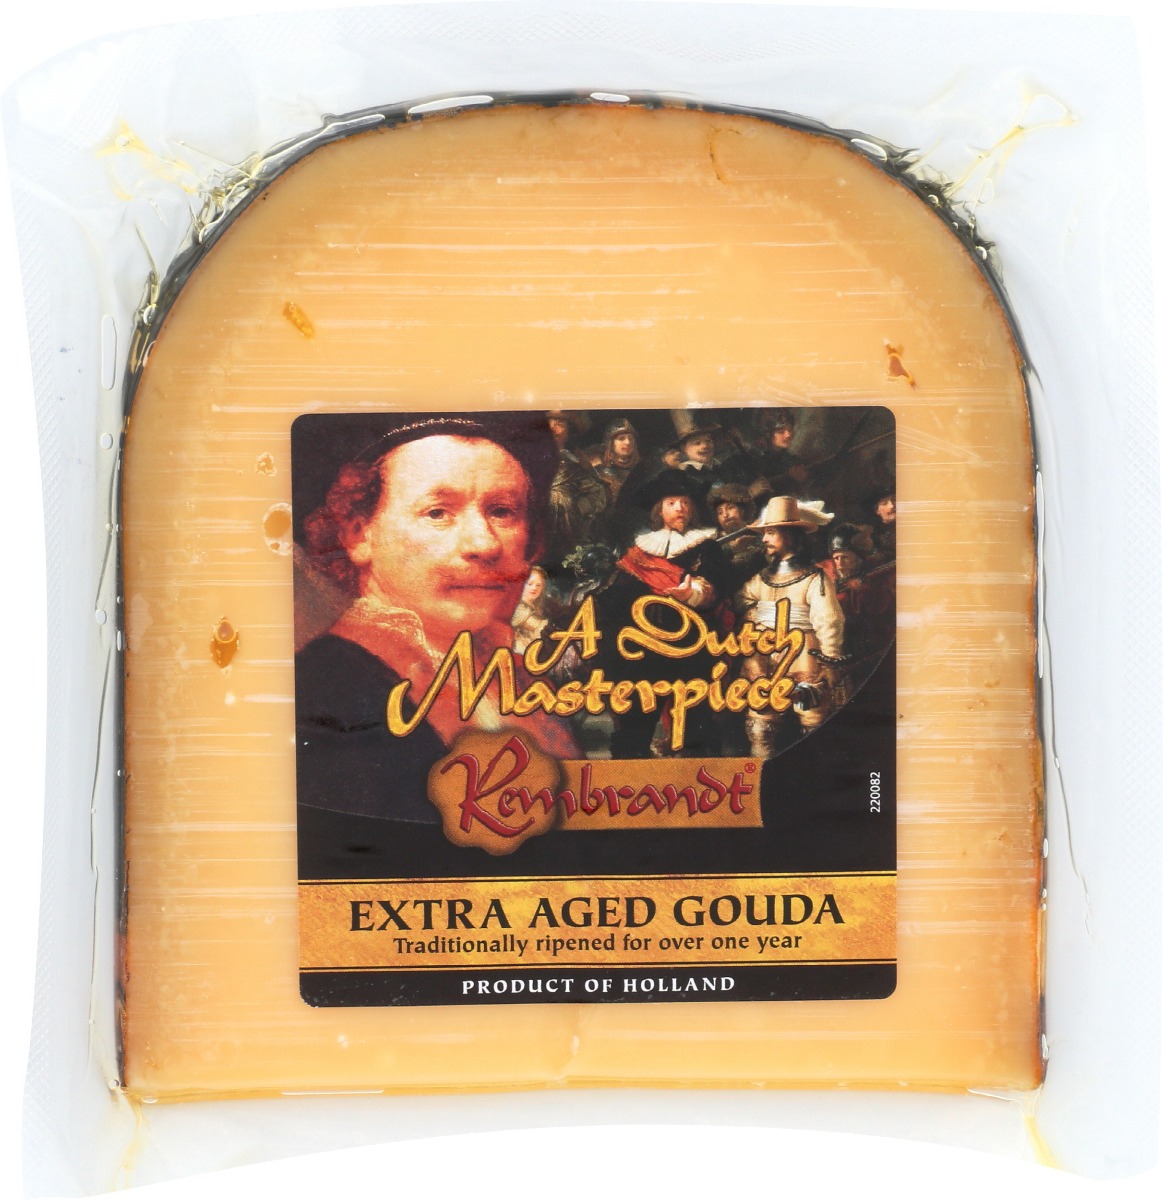 A Dutch Masterpiece, Rembrandt, Extra Aged Gouda Cheese - pink